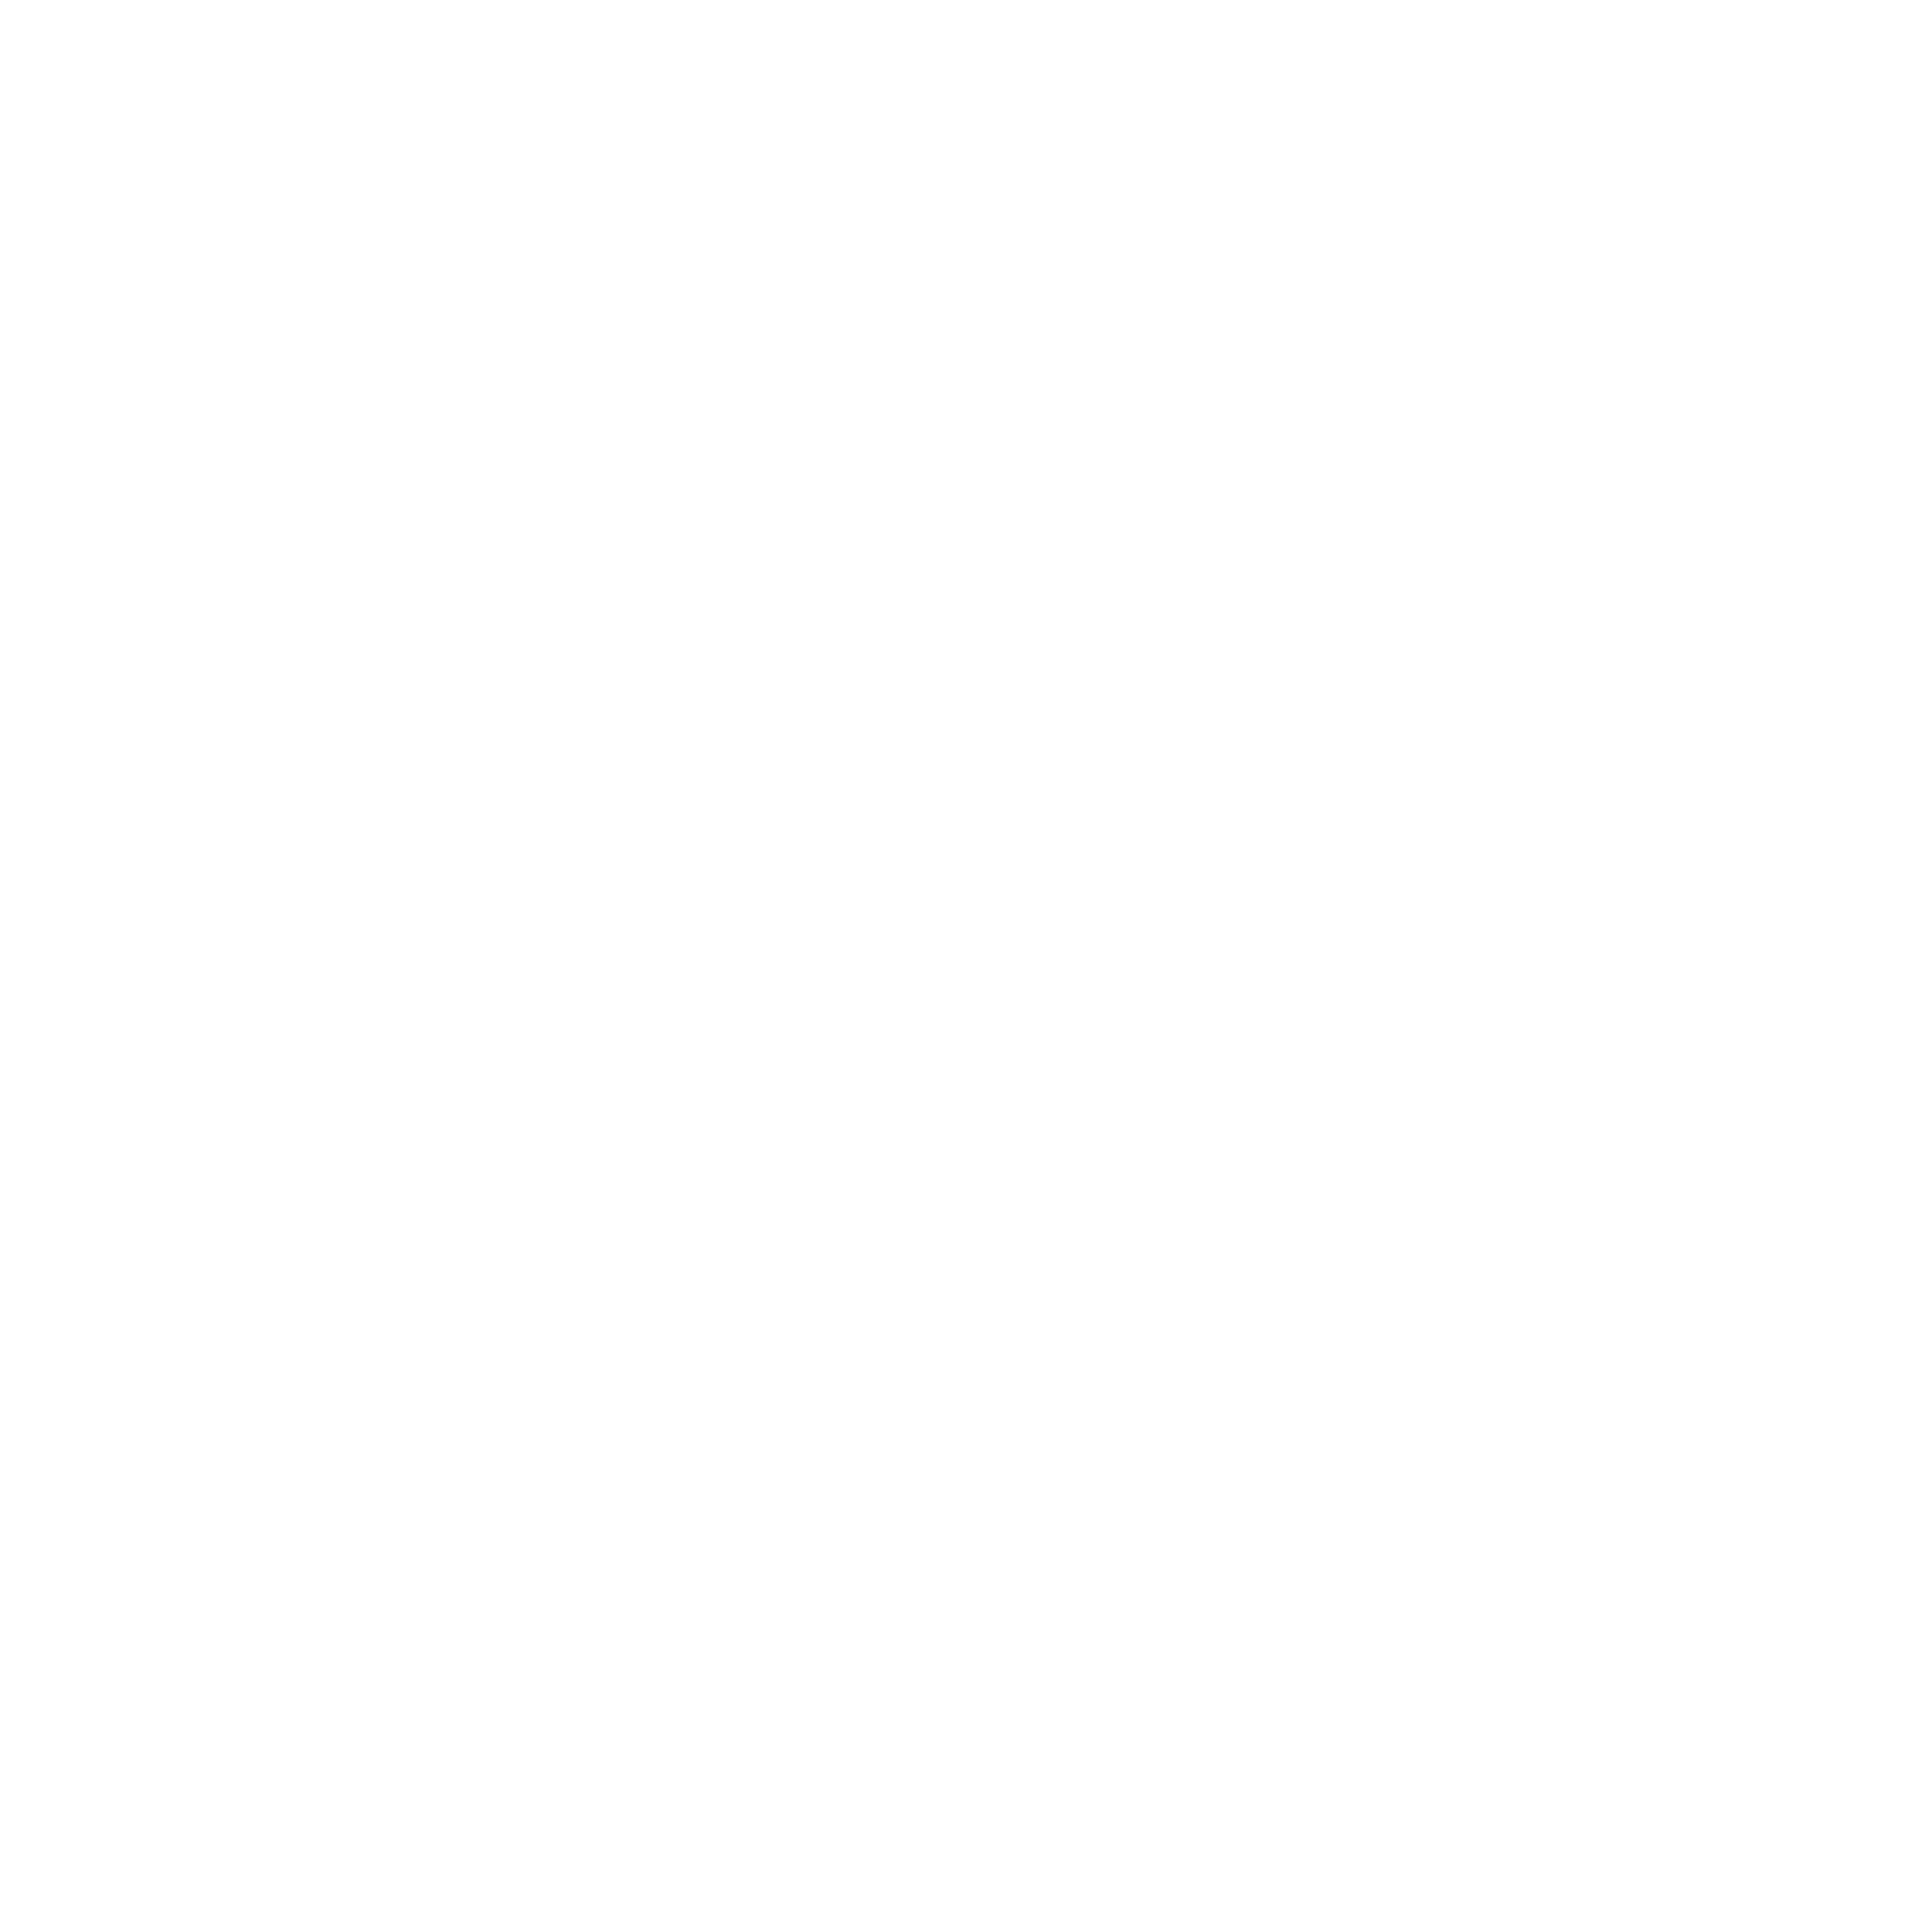 City of Altoona address, phone number, and hours of operation.